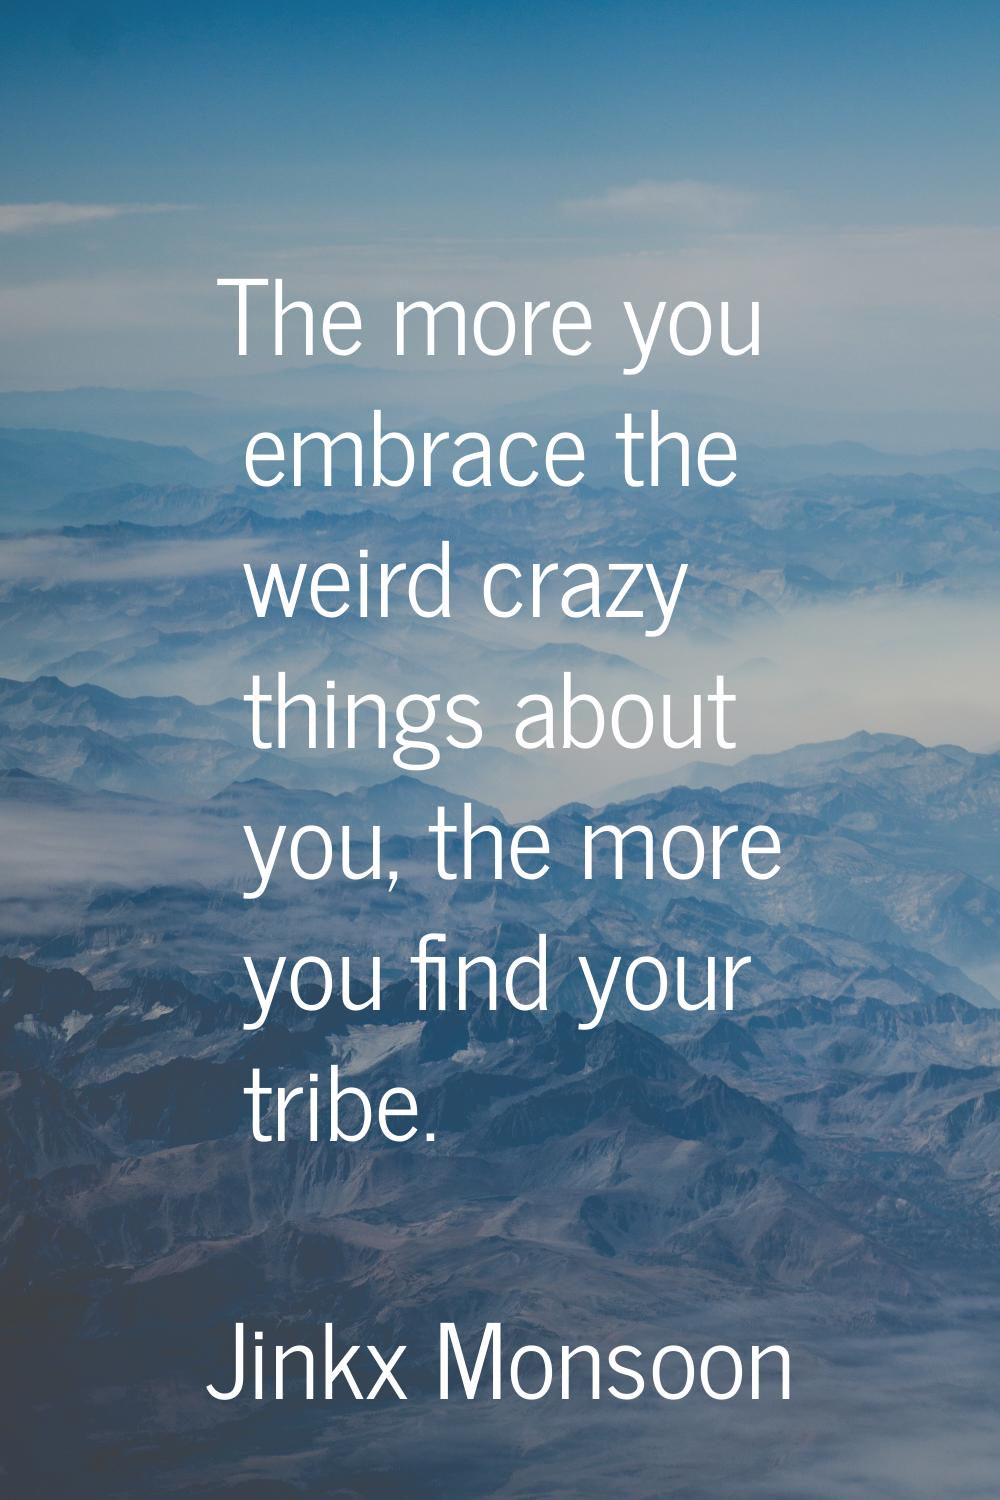 The more you embrace the weird crazy things about you, the more you find your tribe.